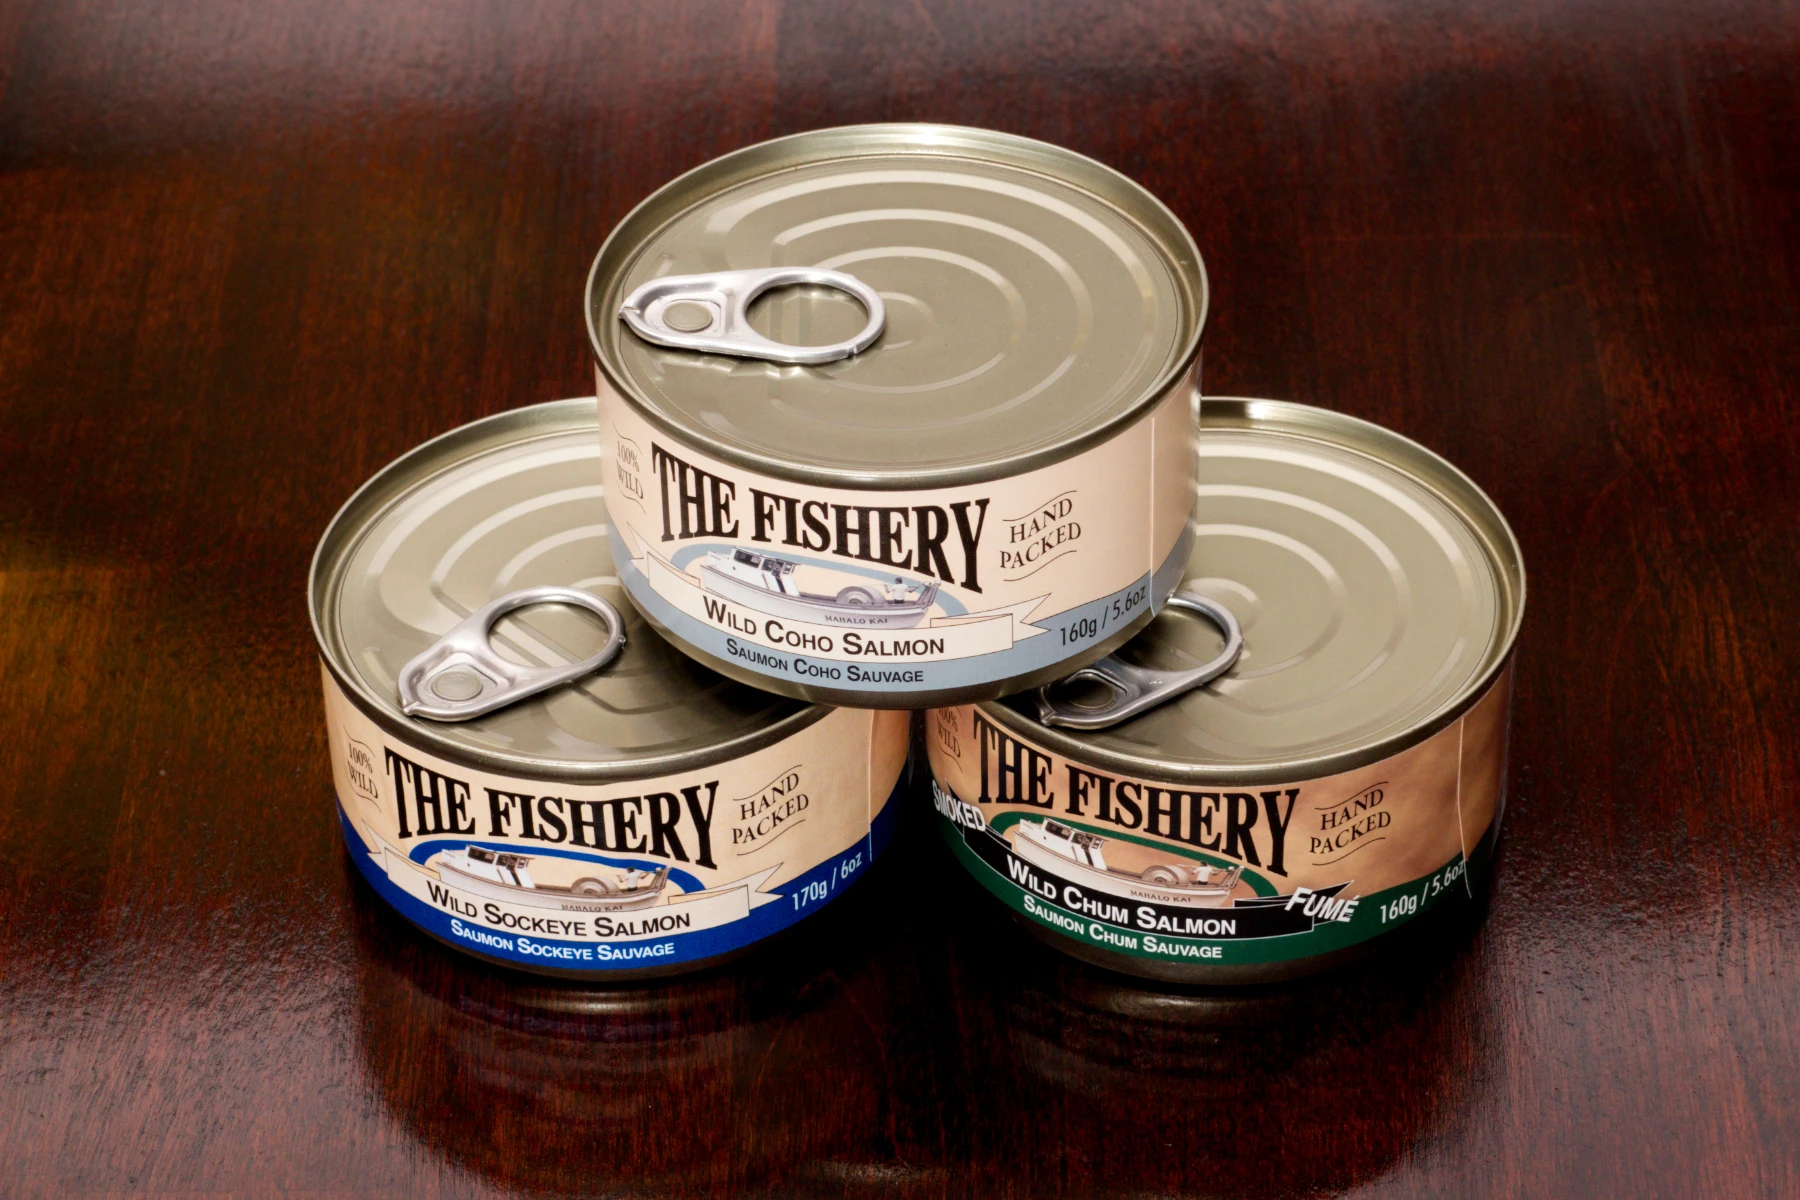 Three different salmon cans from The Fishery